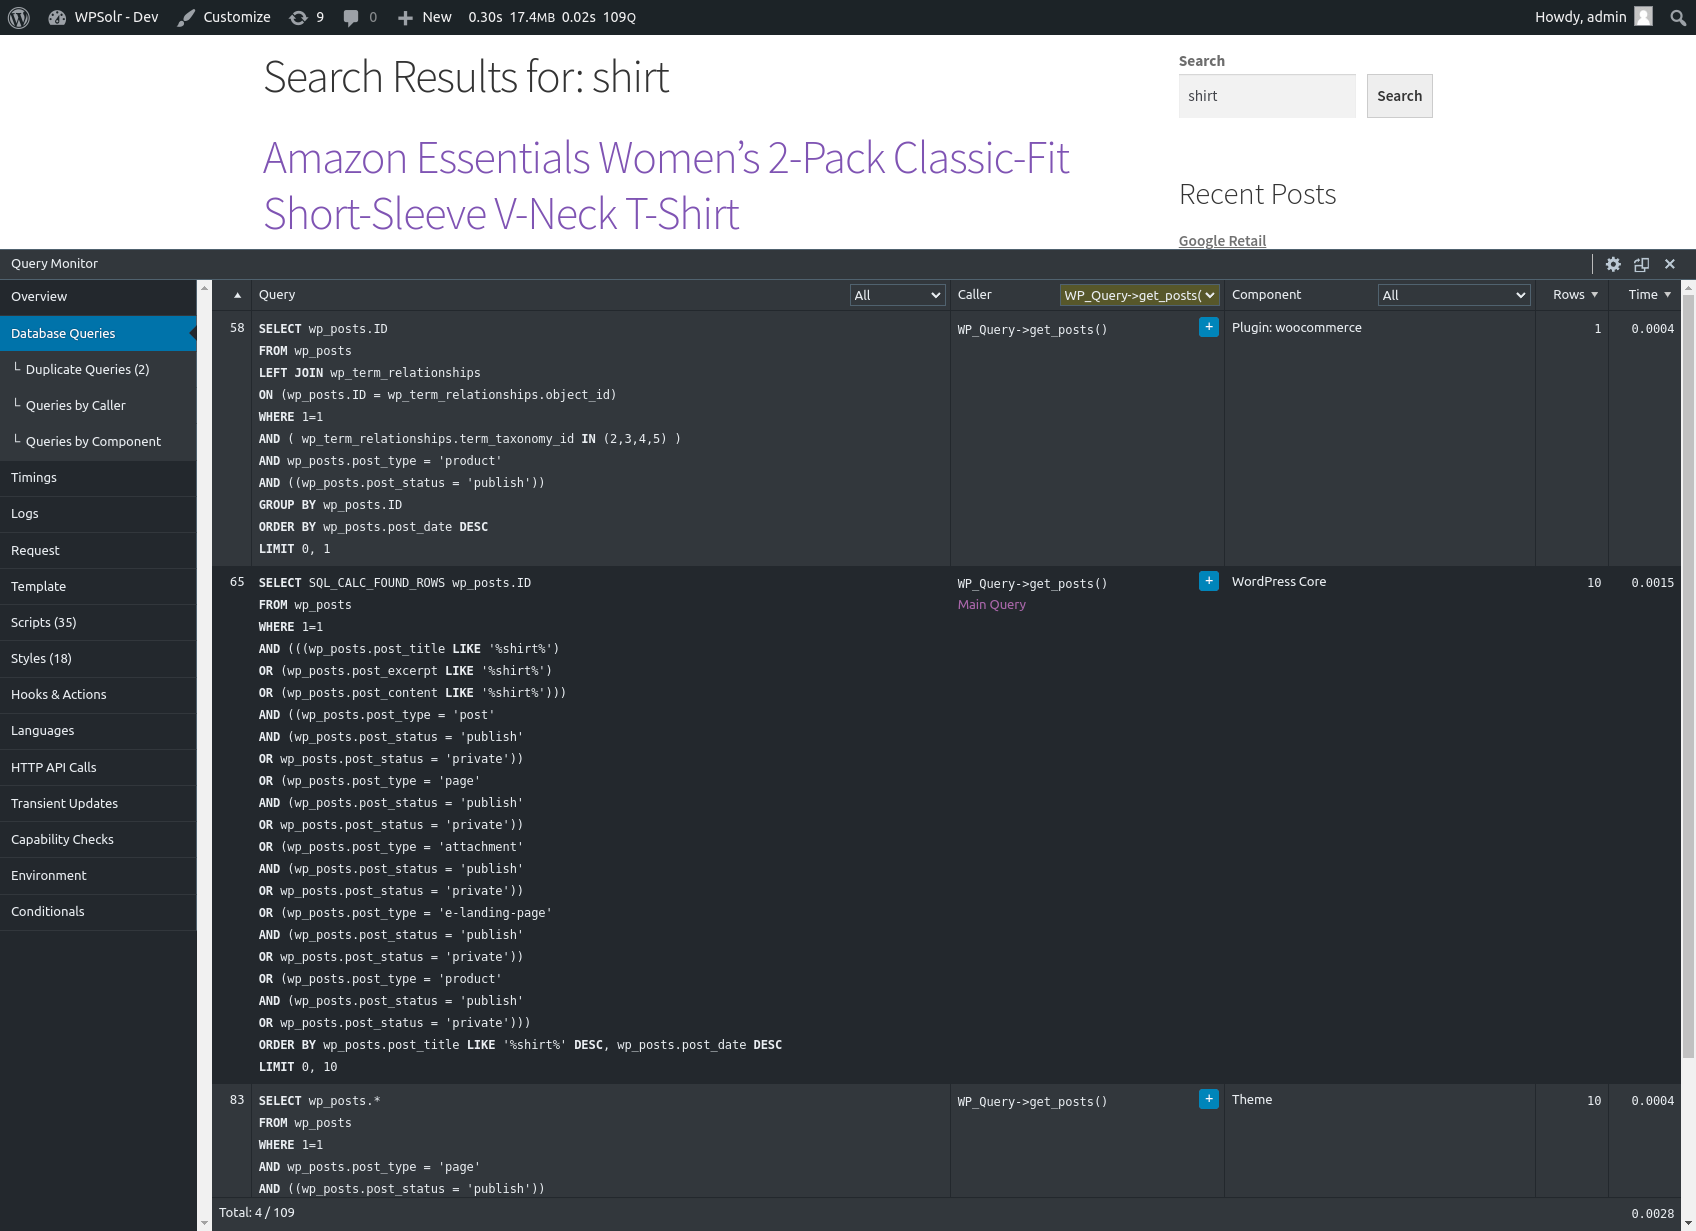 Query monitor screenshot : All WP_Query get_posts SQL queries 